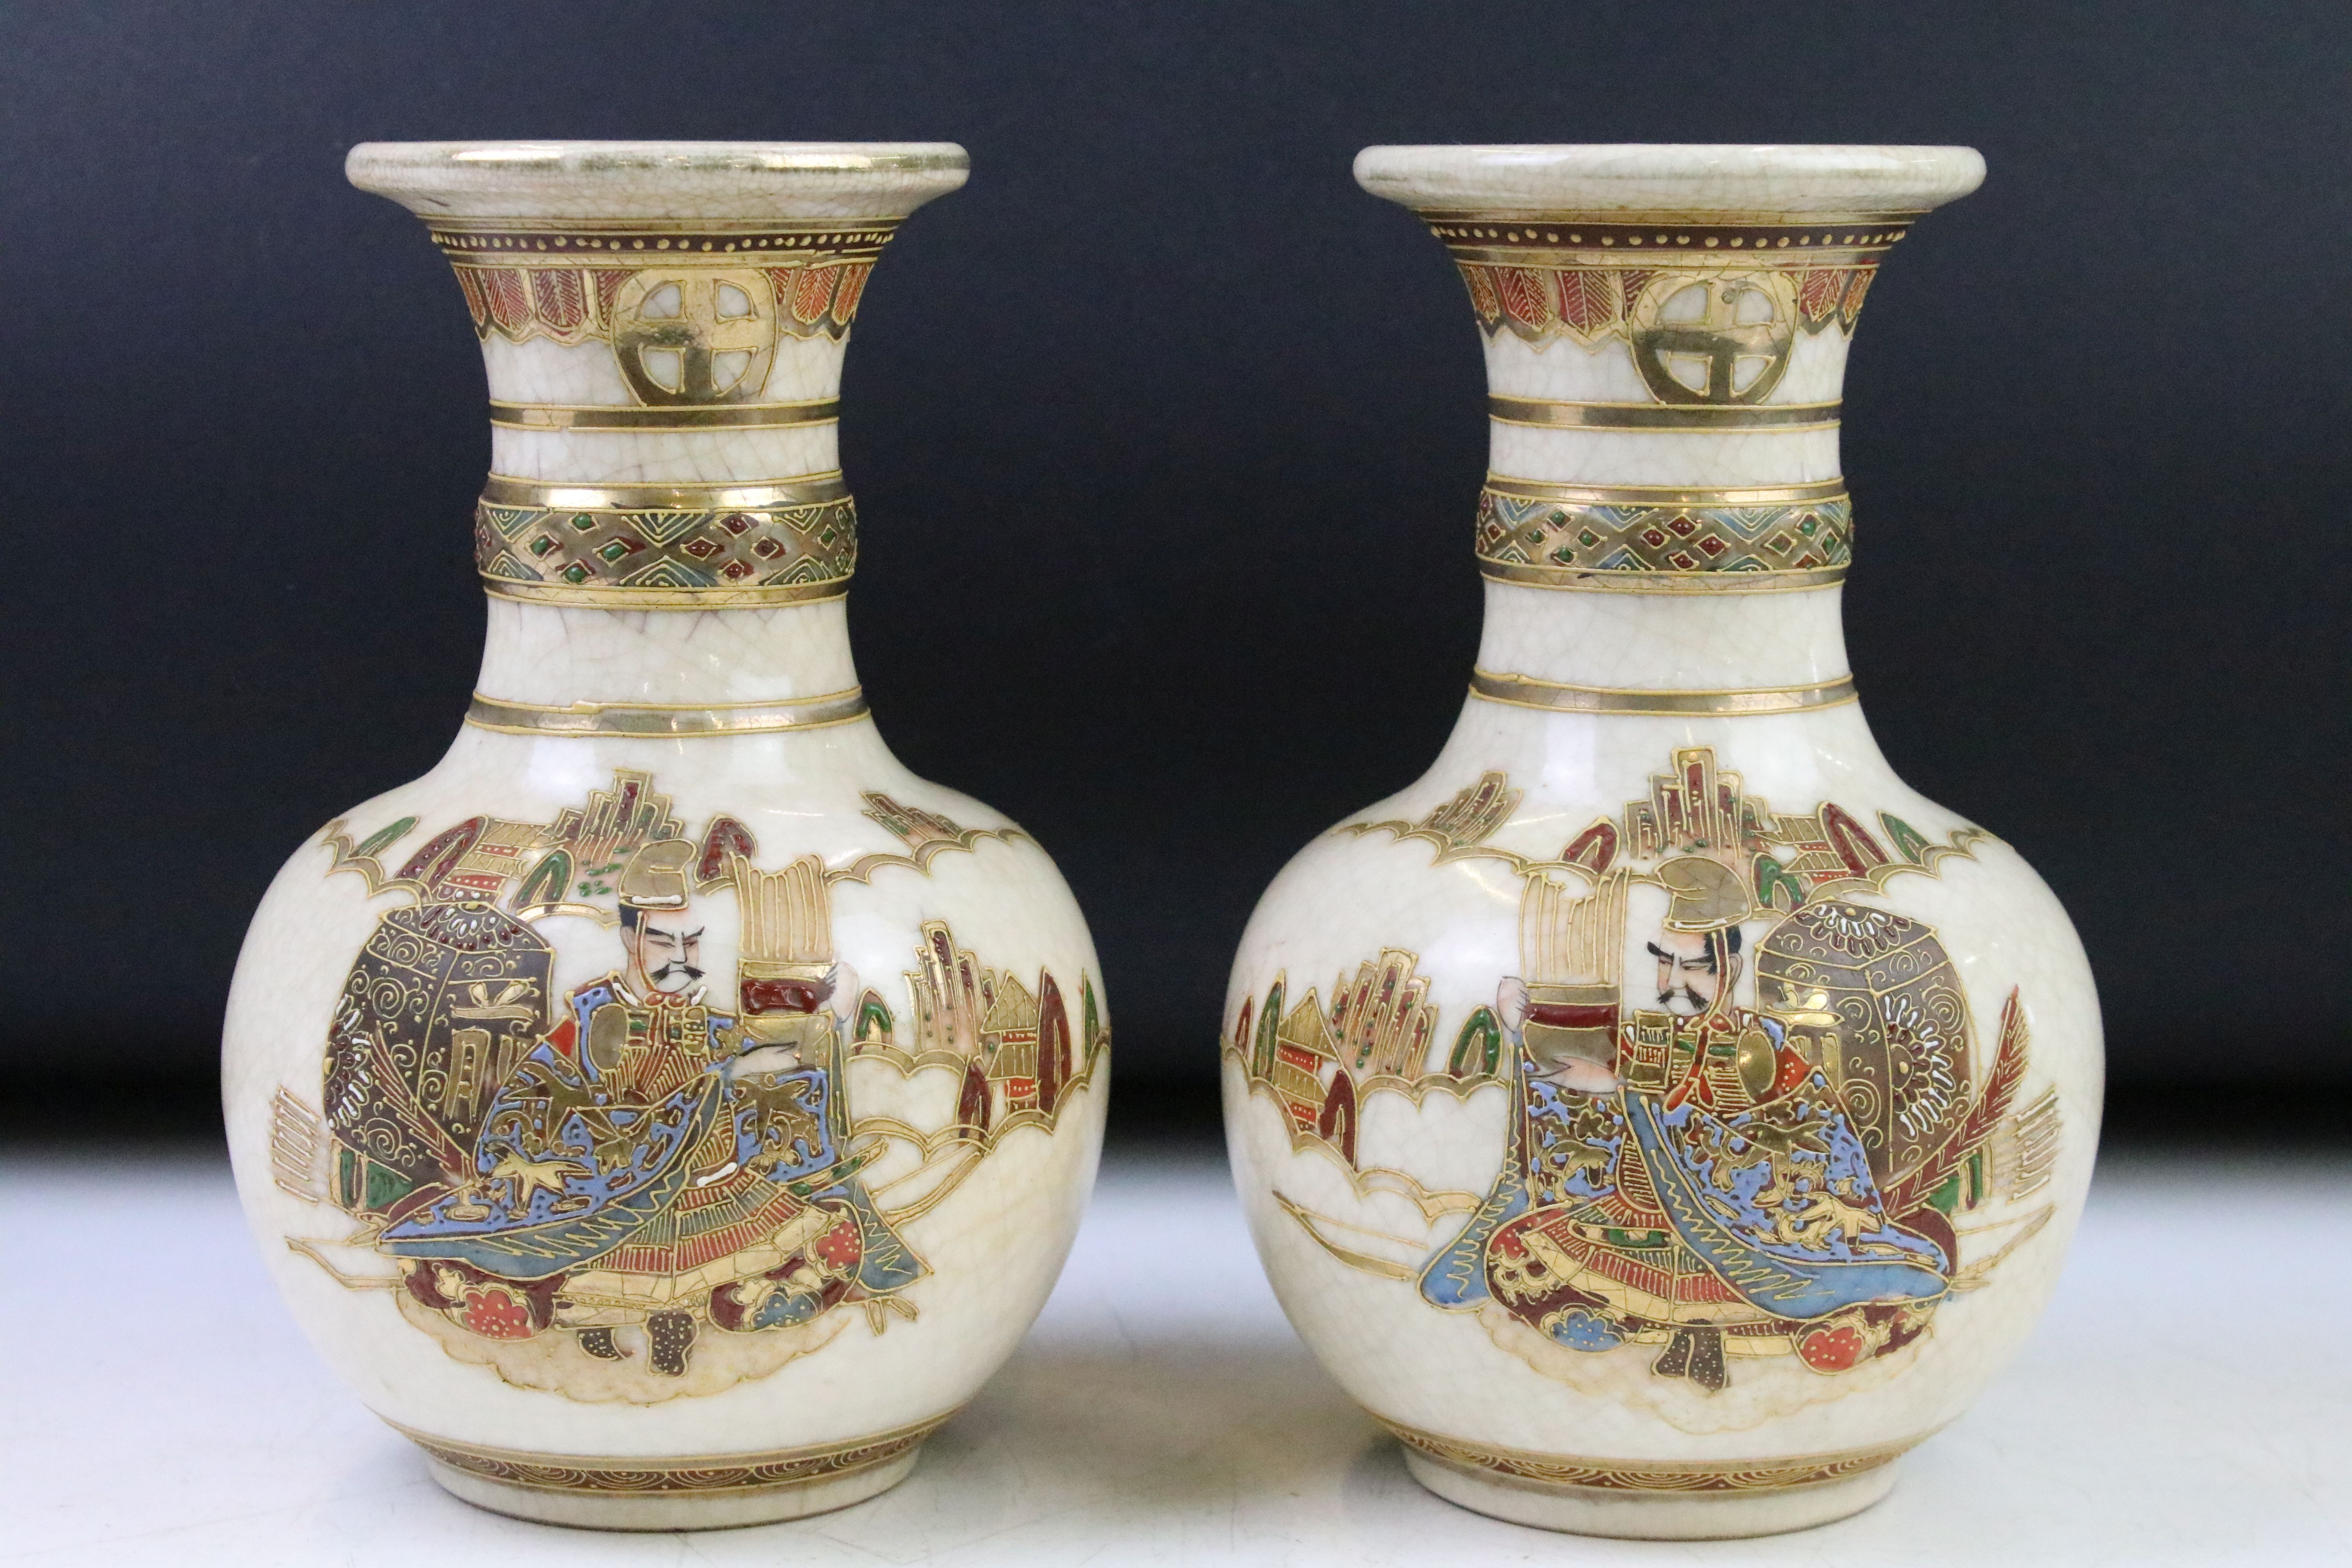 Pair of Early 20th century Japanese Kusube Crackle Glaze Vases, hand painted with seated warriors